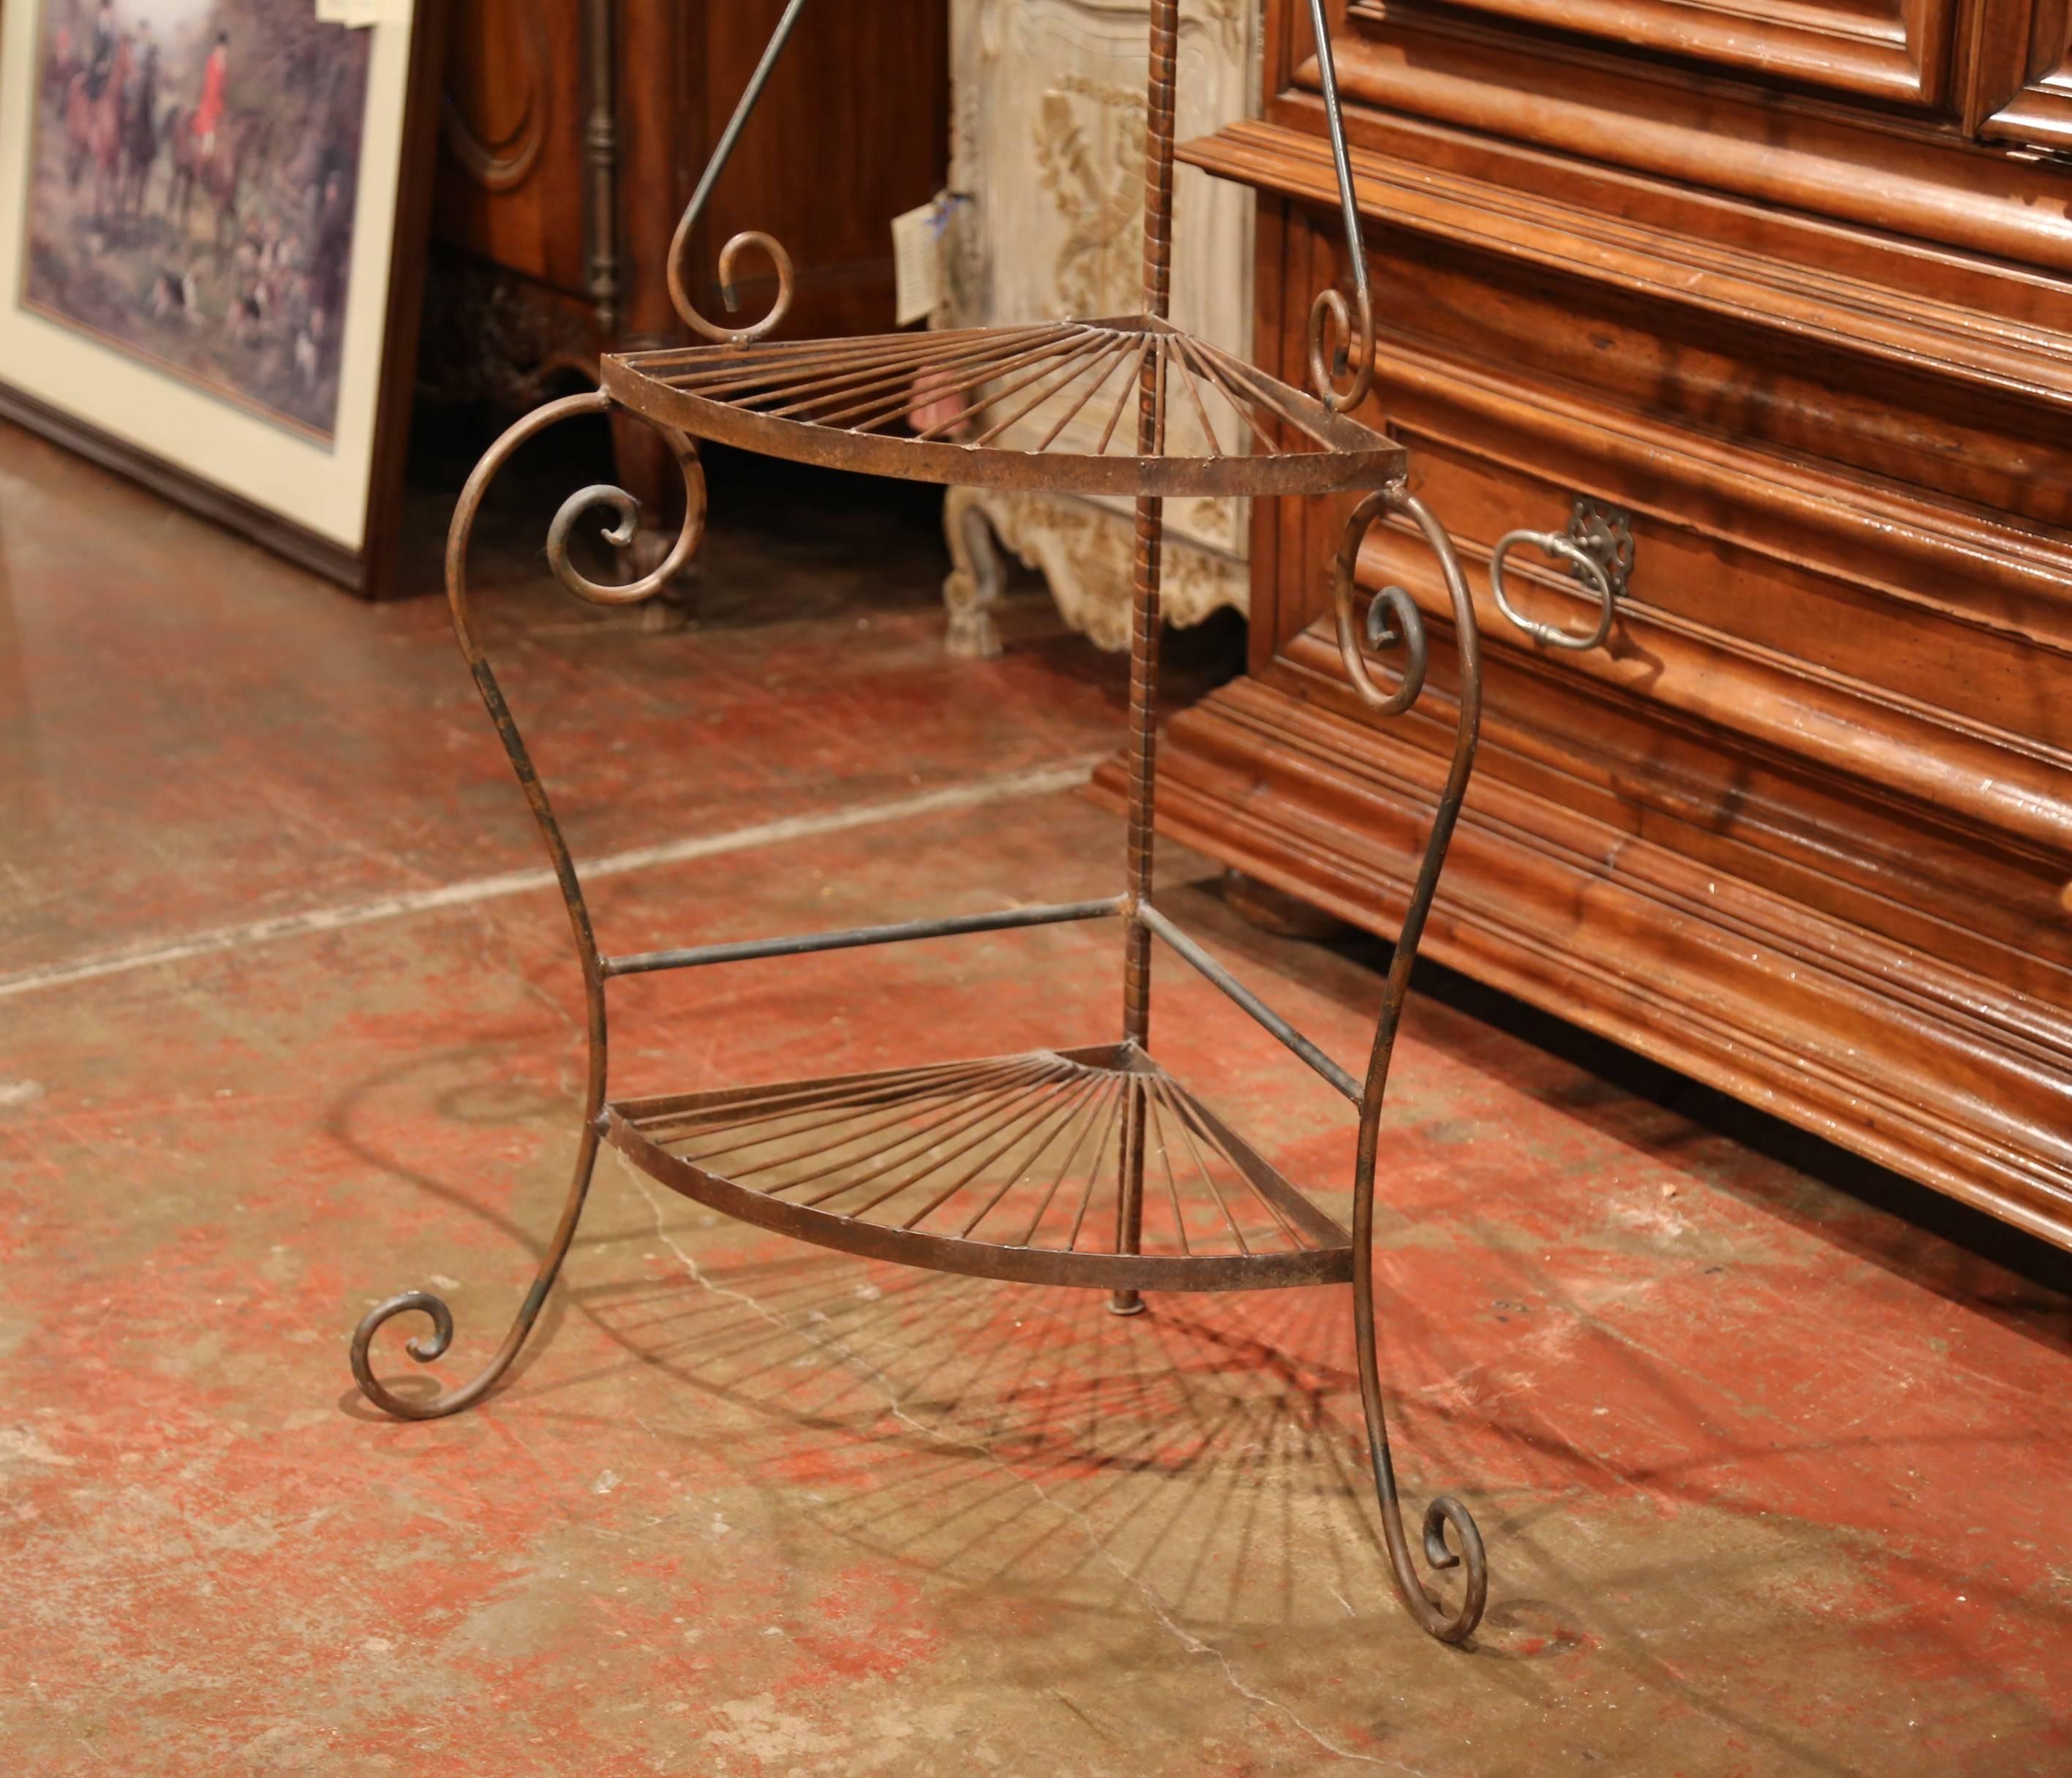 Create more surface space in a living room, study or bedroom with this interesting and useful corner shelf. The display piece made of iron stands on three curved feet and features four shelves. The piece is in excellent condition and adorns a rusty